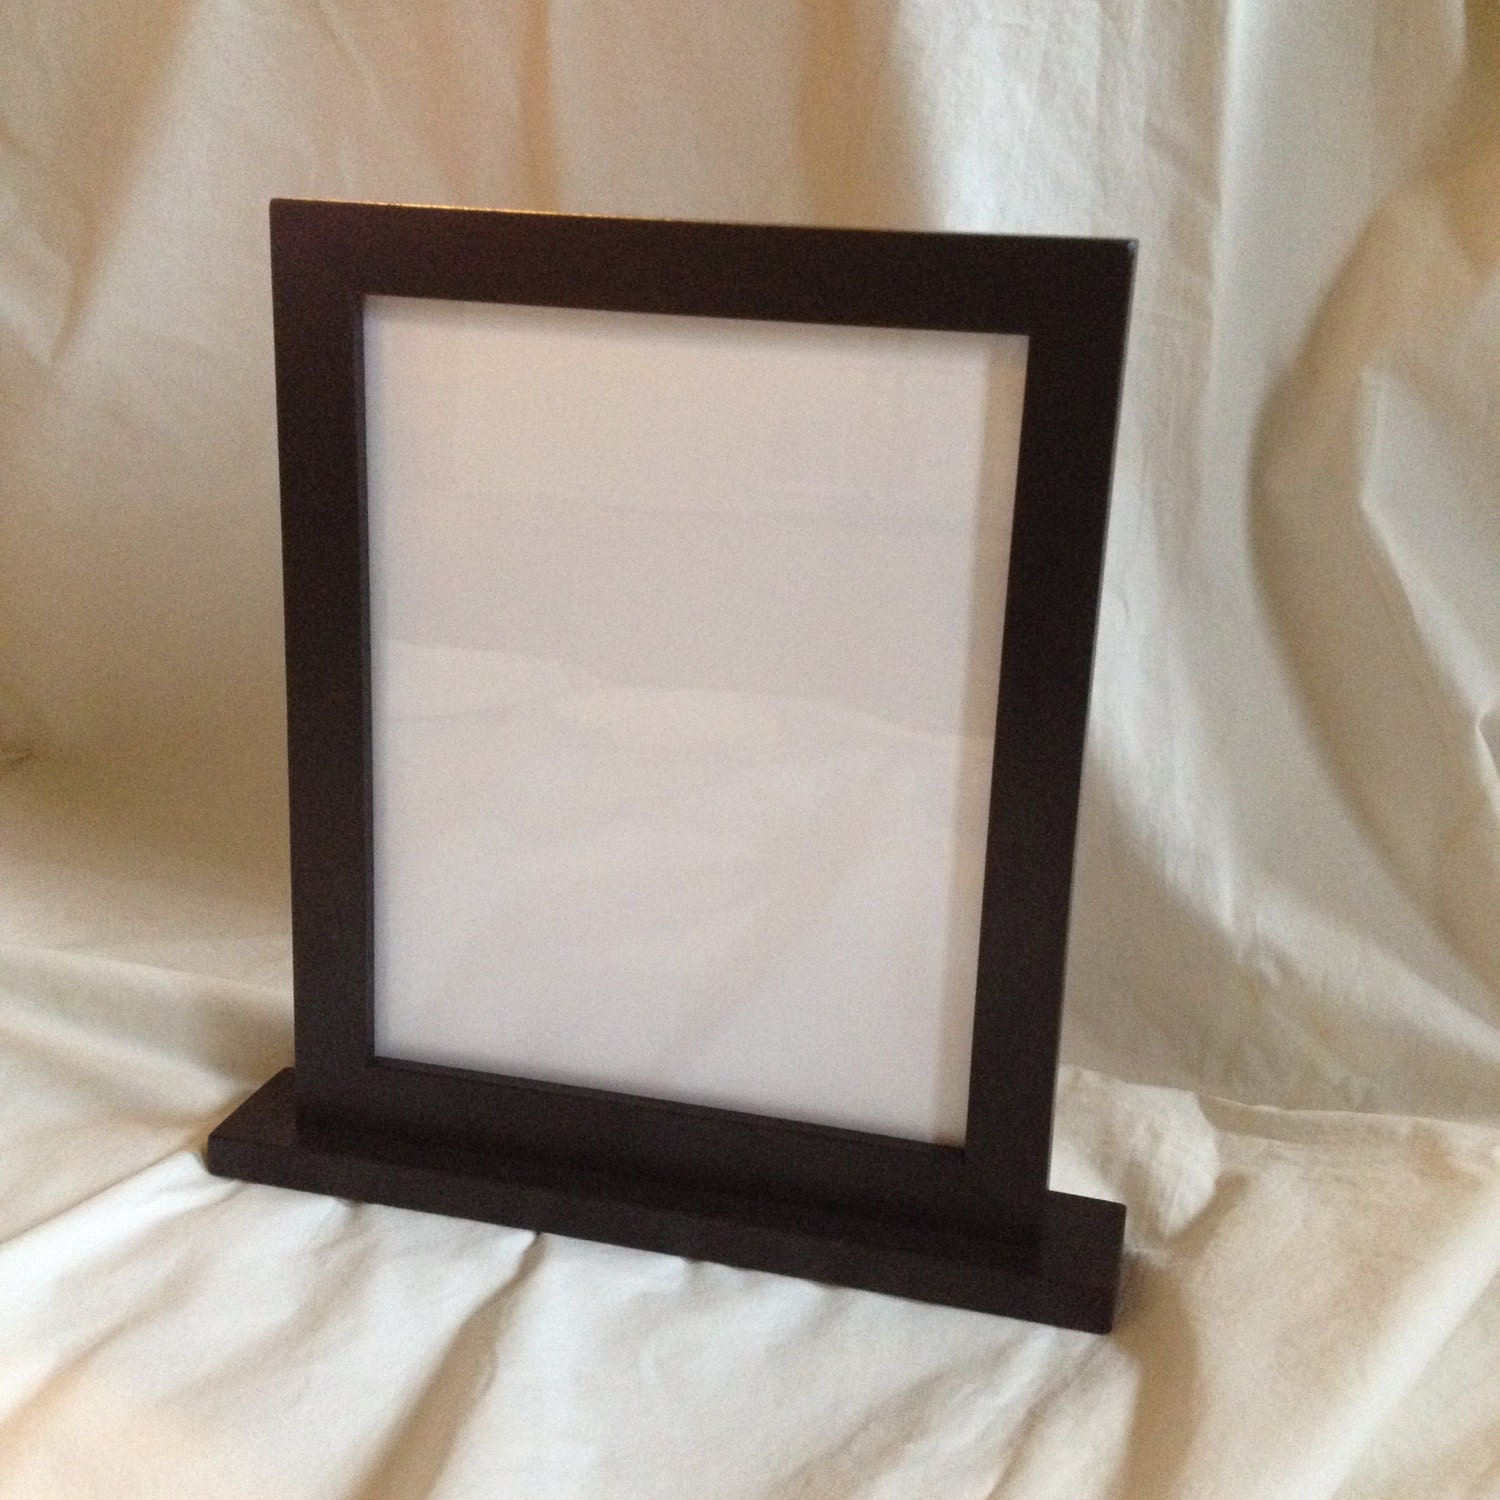 double sided picture frame australia